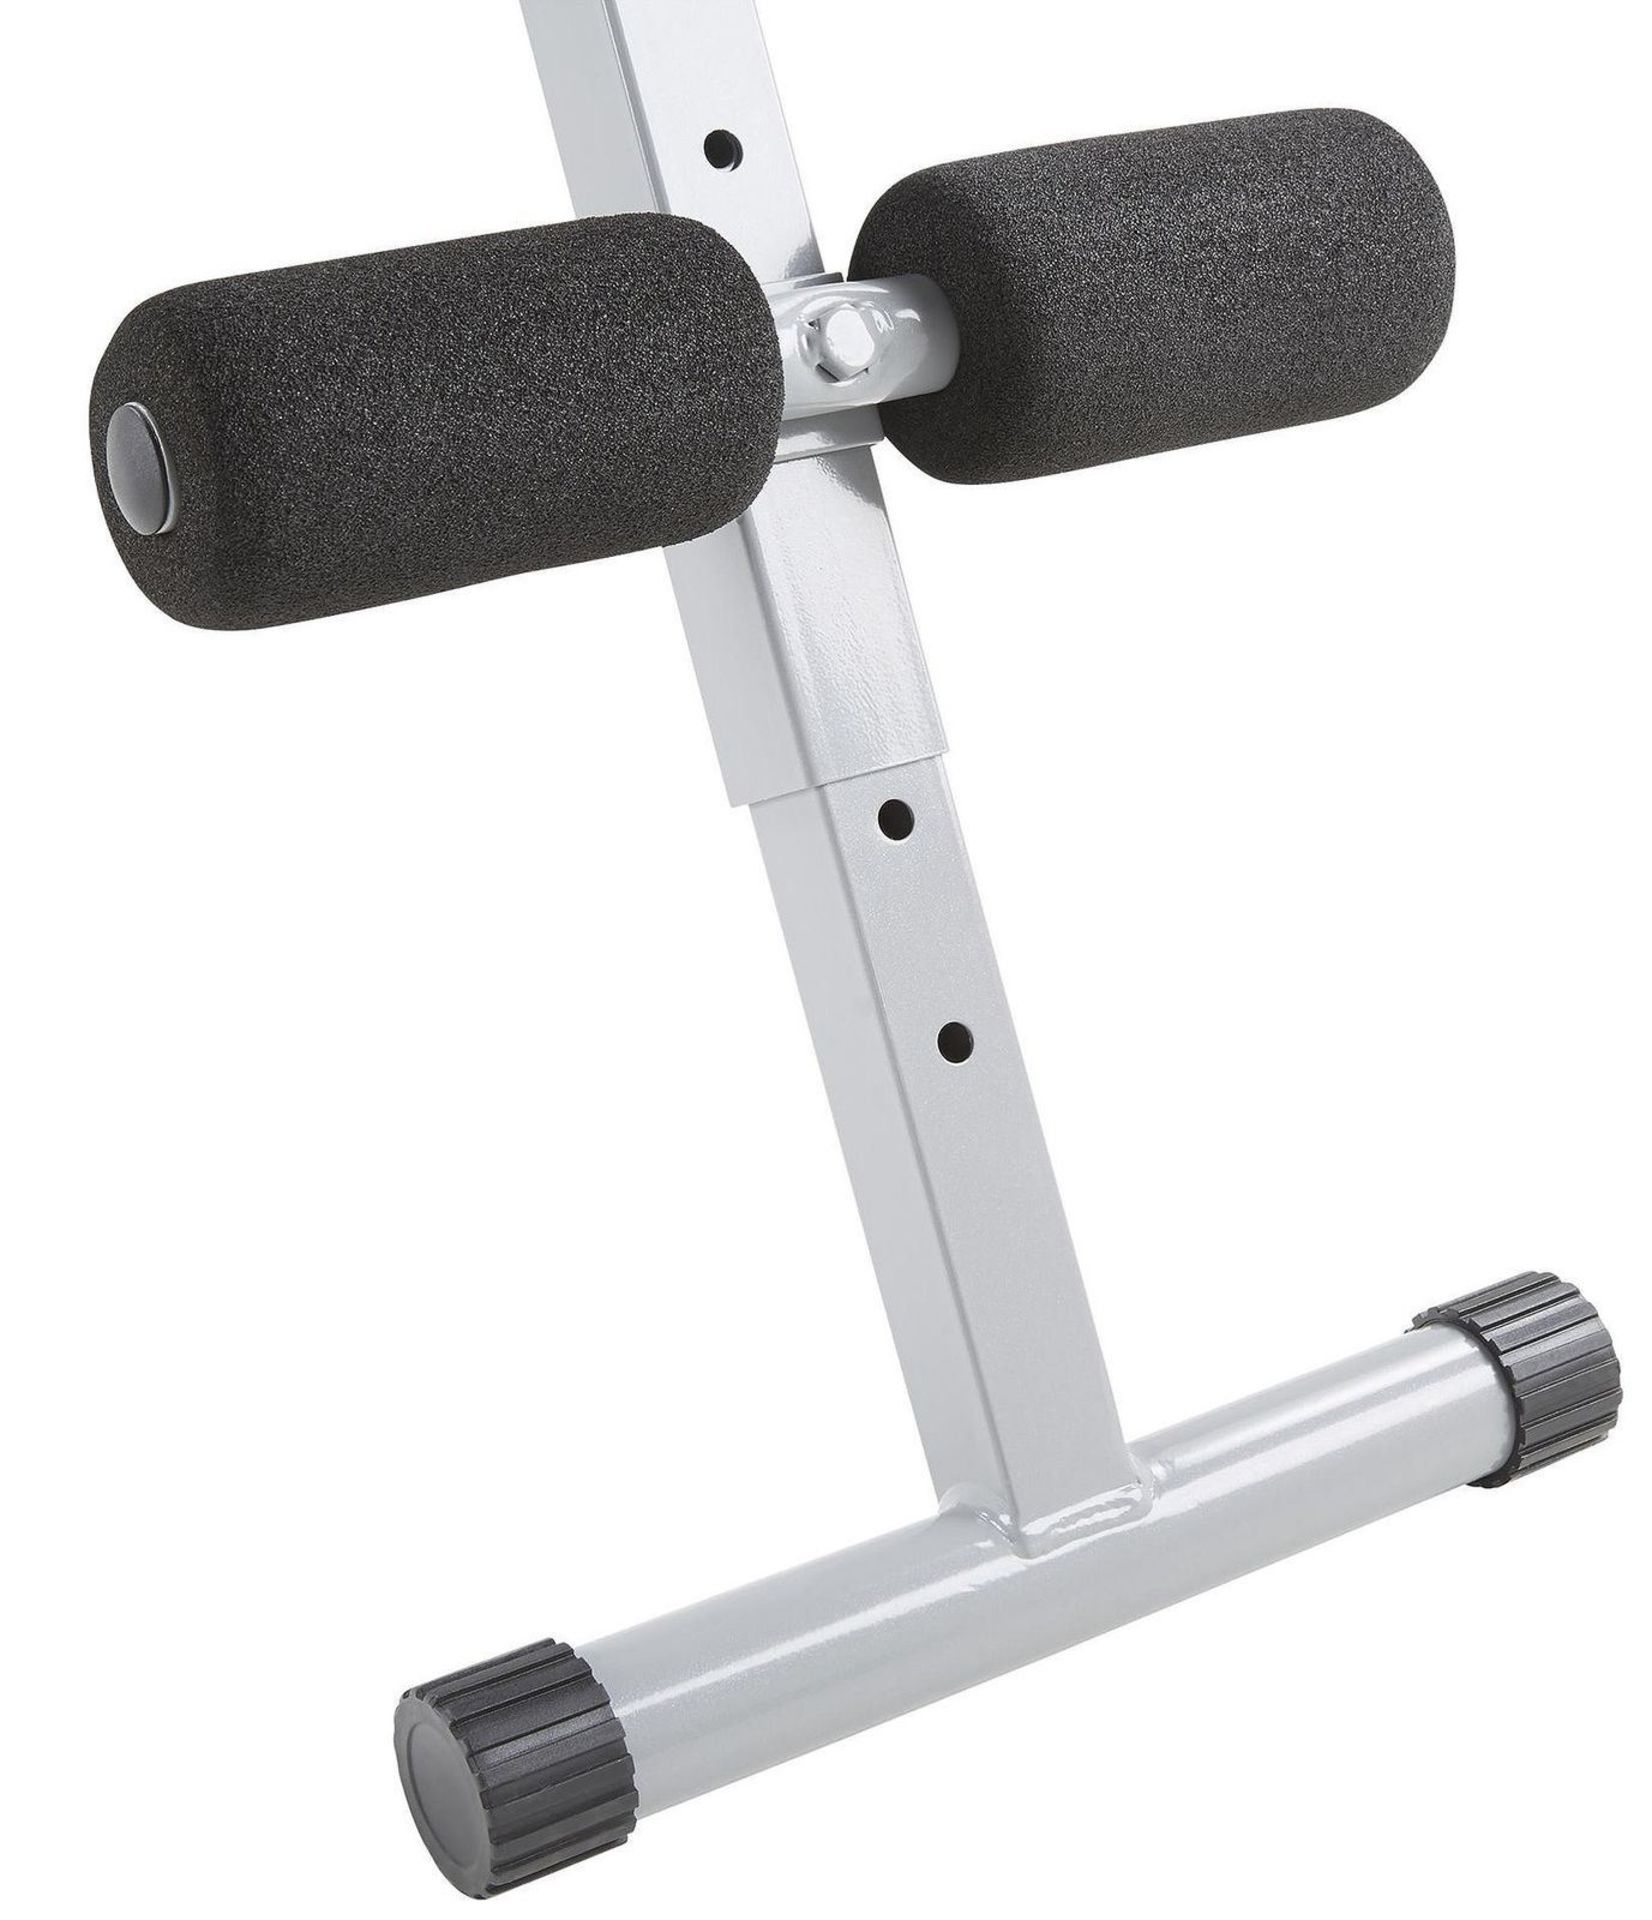 V Brand New 2 in 1 Incline/Sit Up Bench - Tesco Price £35.00 - Image 5 of 6